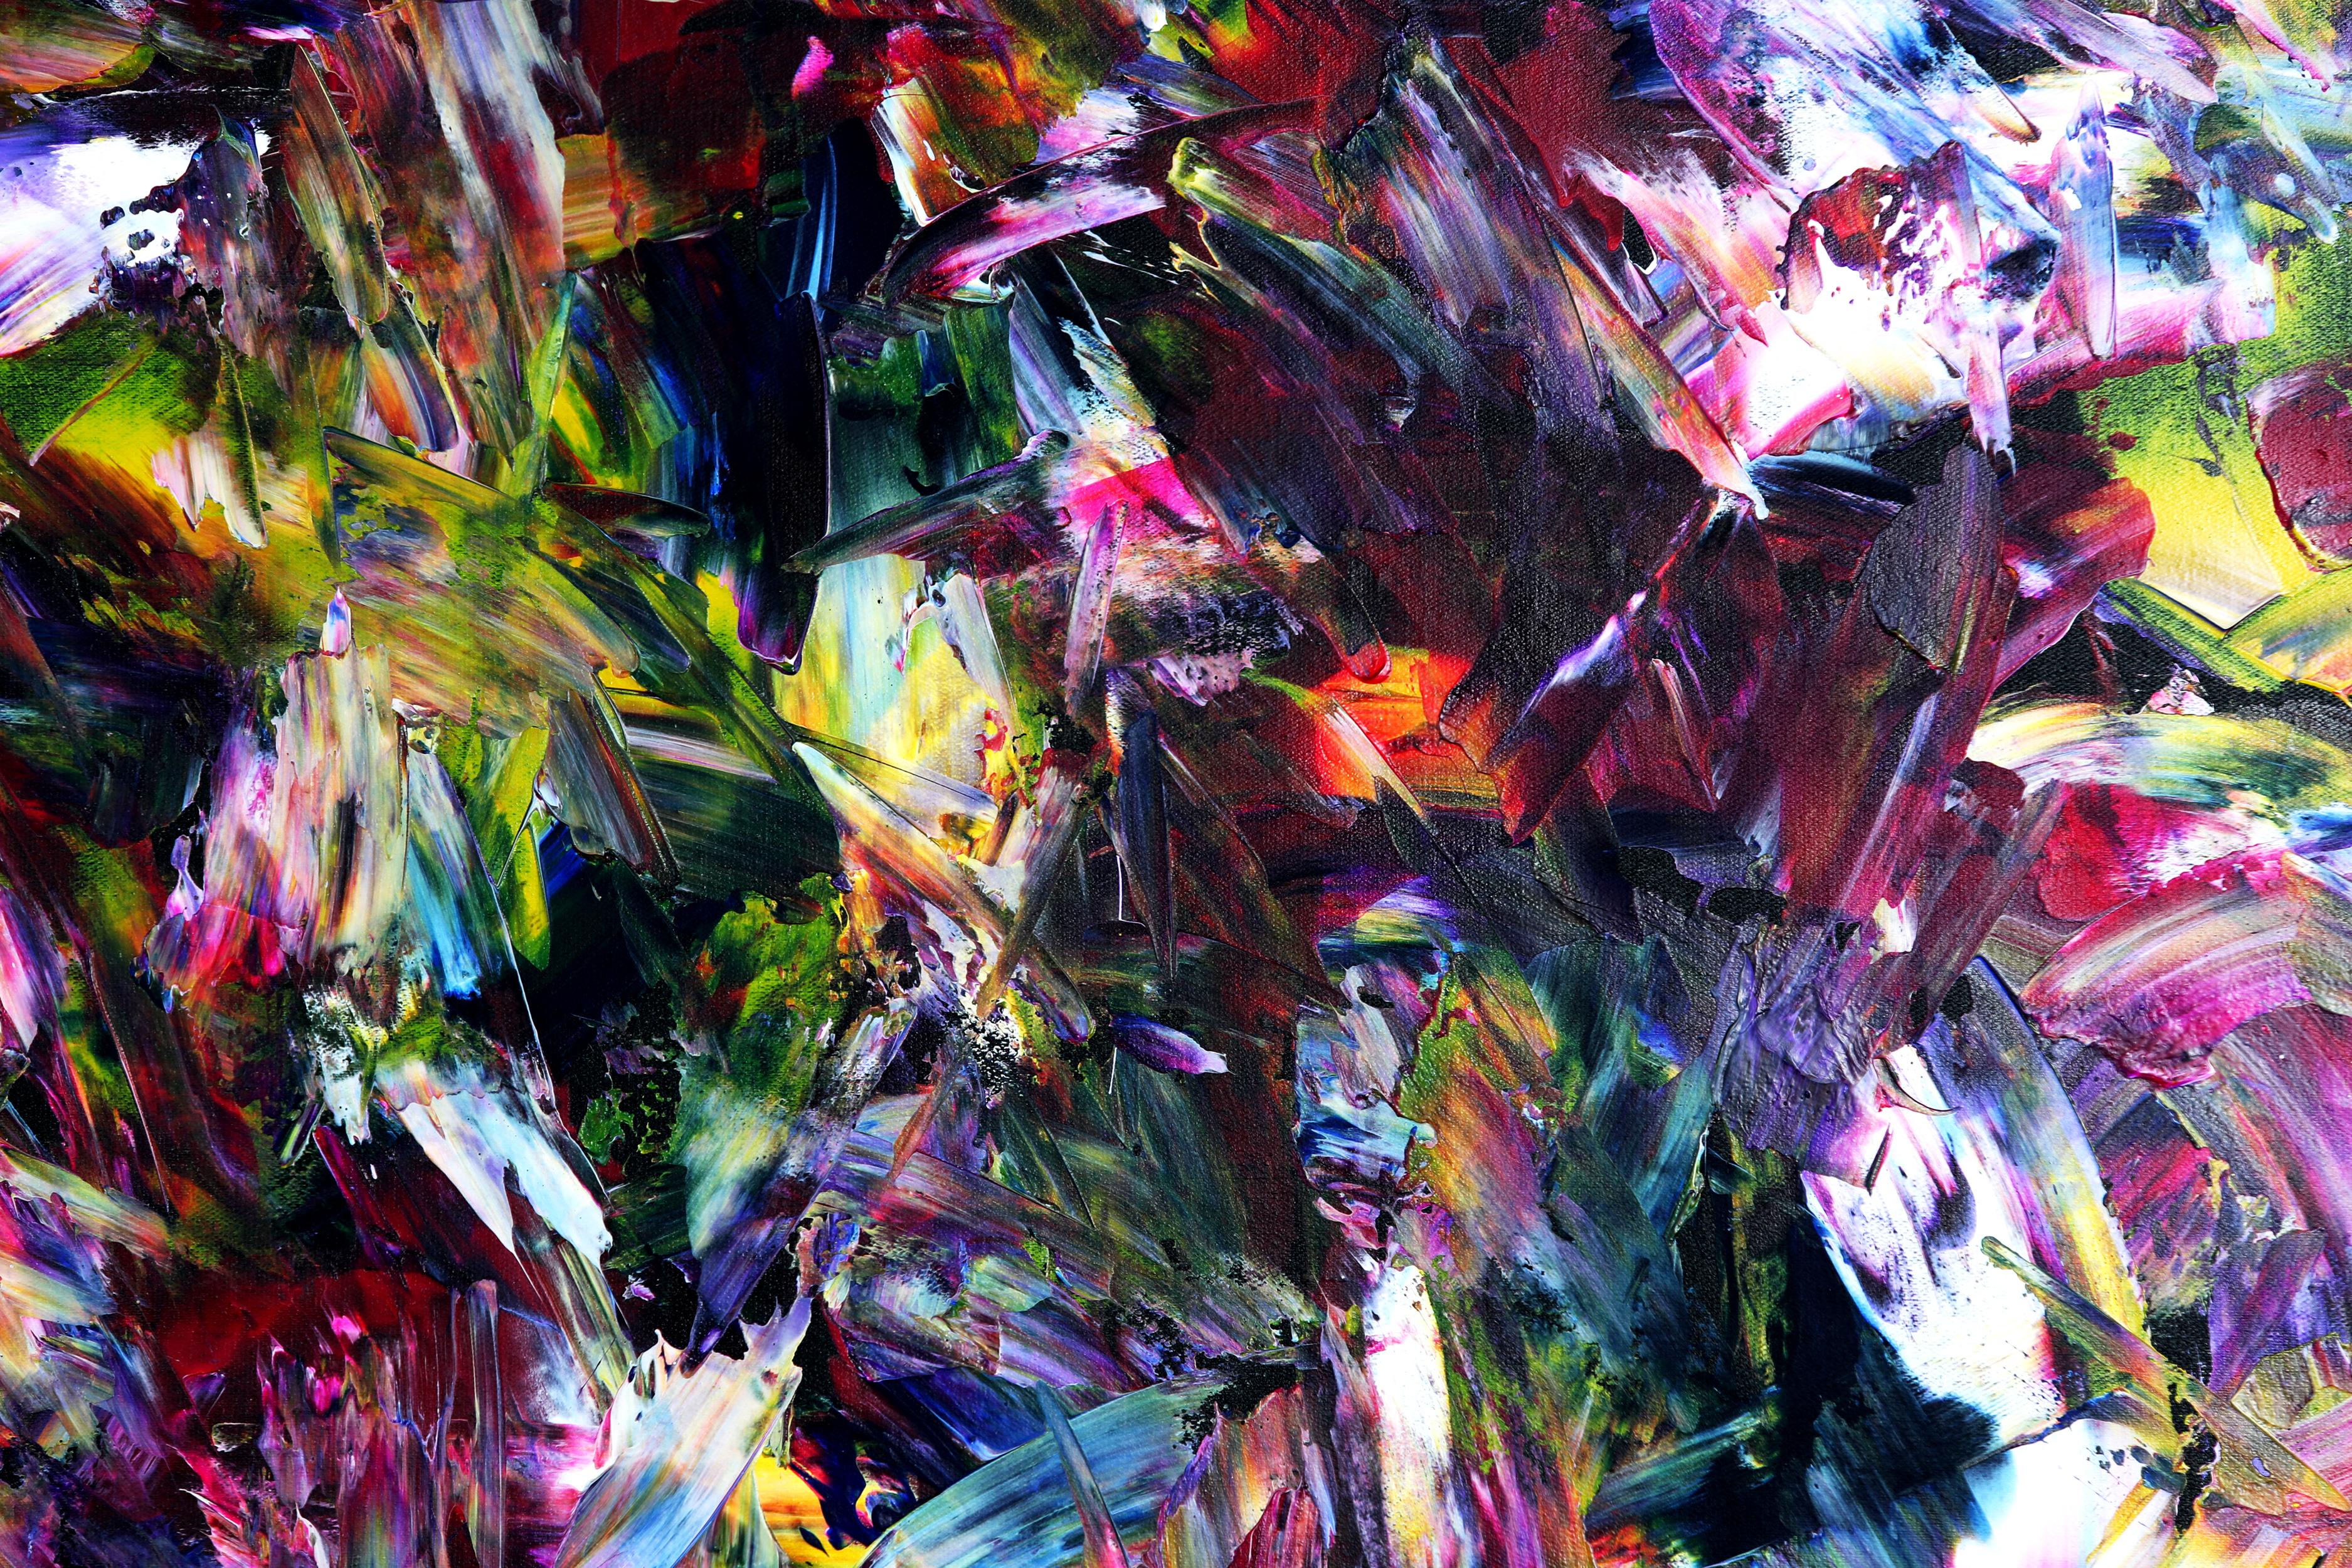 Darkened Crystals - Abstract Expressionist Painting by Estelle Asmodelle